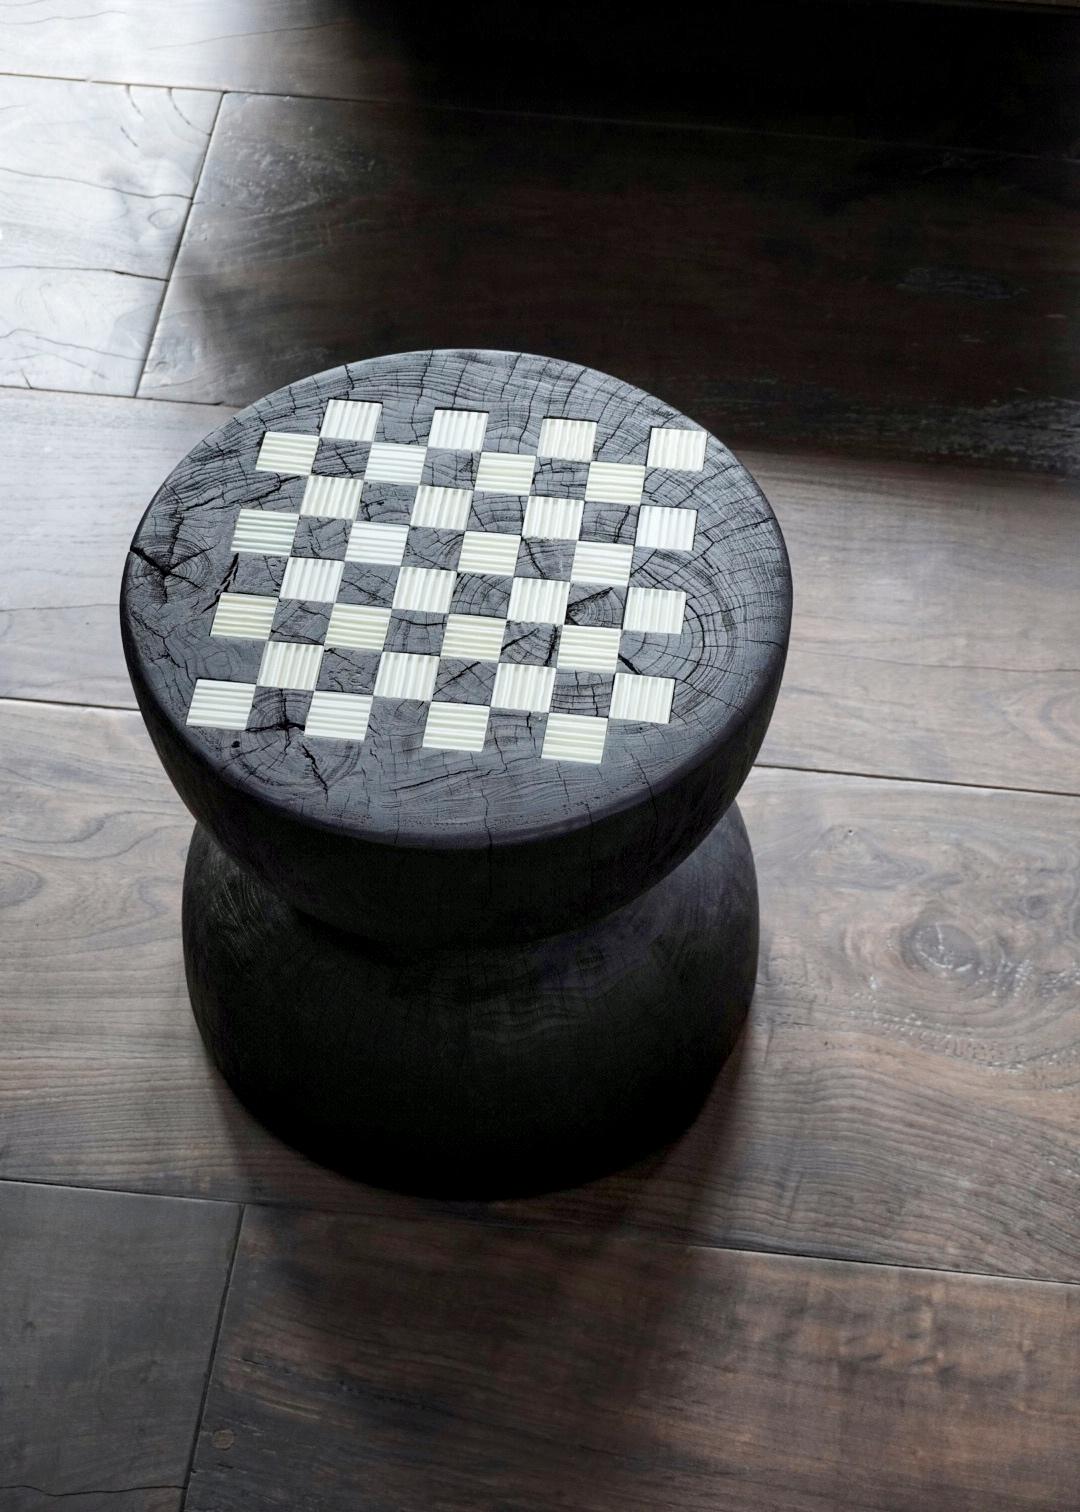 Chess table
This Board Games edition presents classic games and decorative pieces like Backgammon, Chess and Tic Tac Toe, made out of wood and glass. 
Since 2000, Orfeo Quagliata offers a remarkable consistency based in design and a fine technical